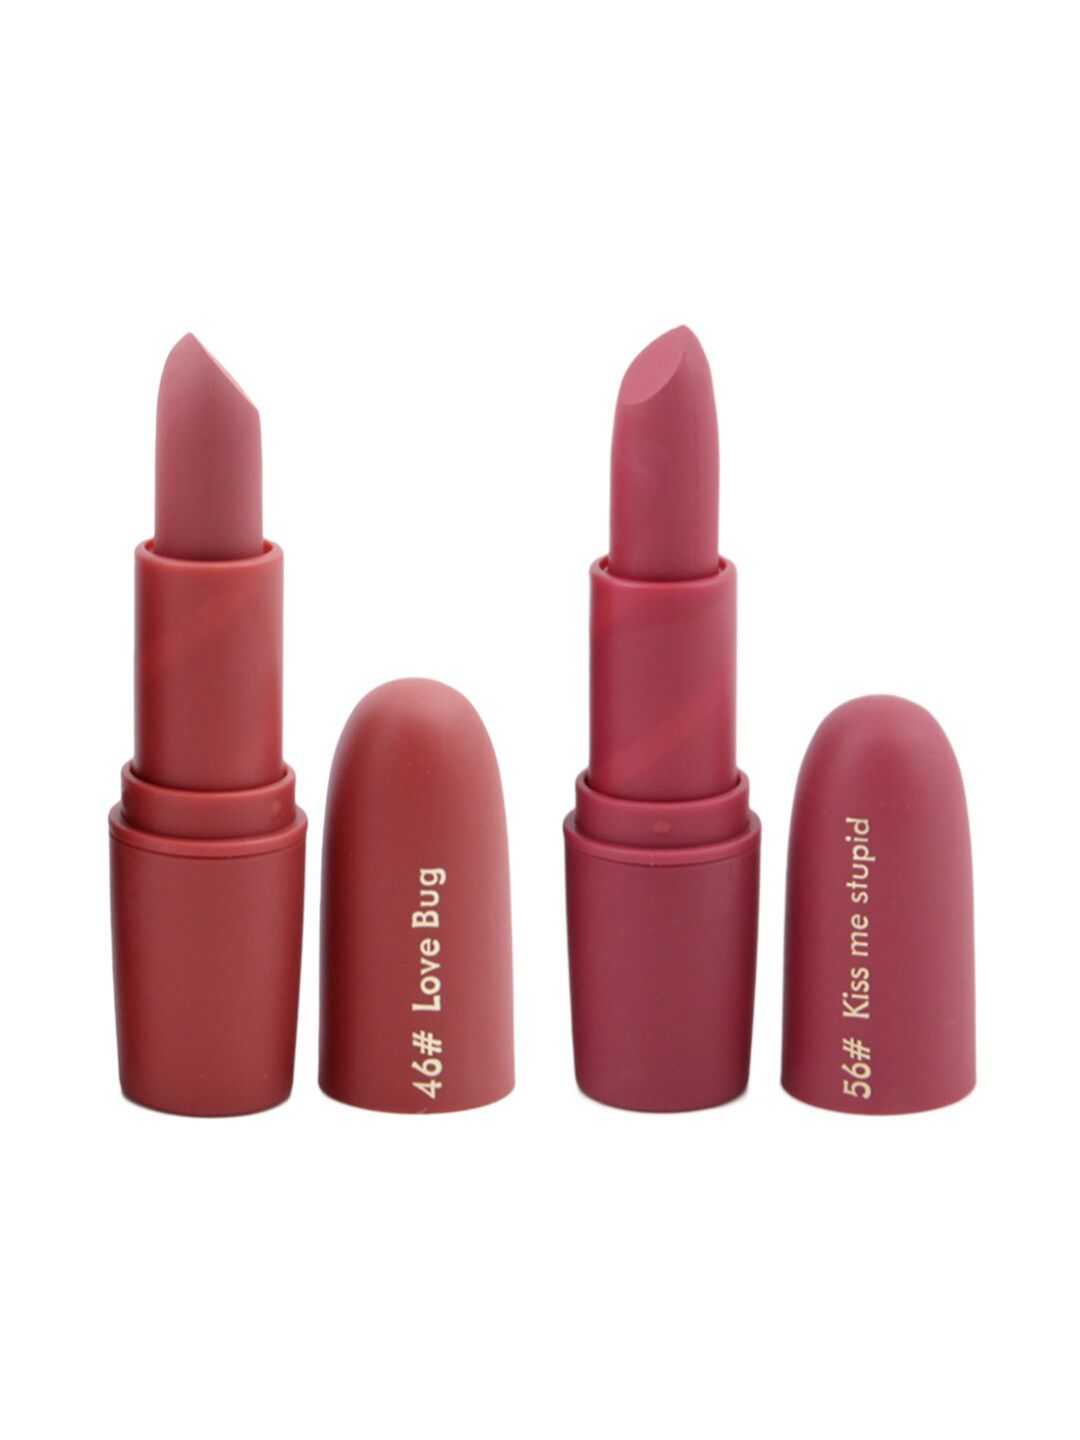 MISS ROSE Set of 2 Matte Creamy Bullet Lipsticks - 46 Love Bug & 56 Kiss Me Stupid Price in India